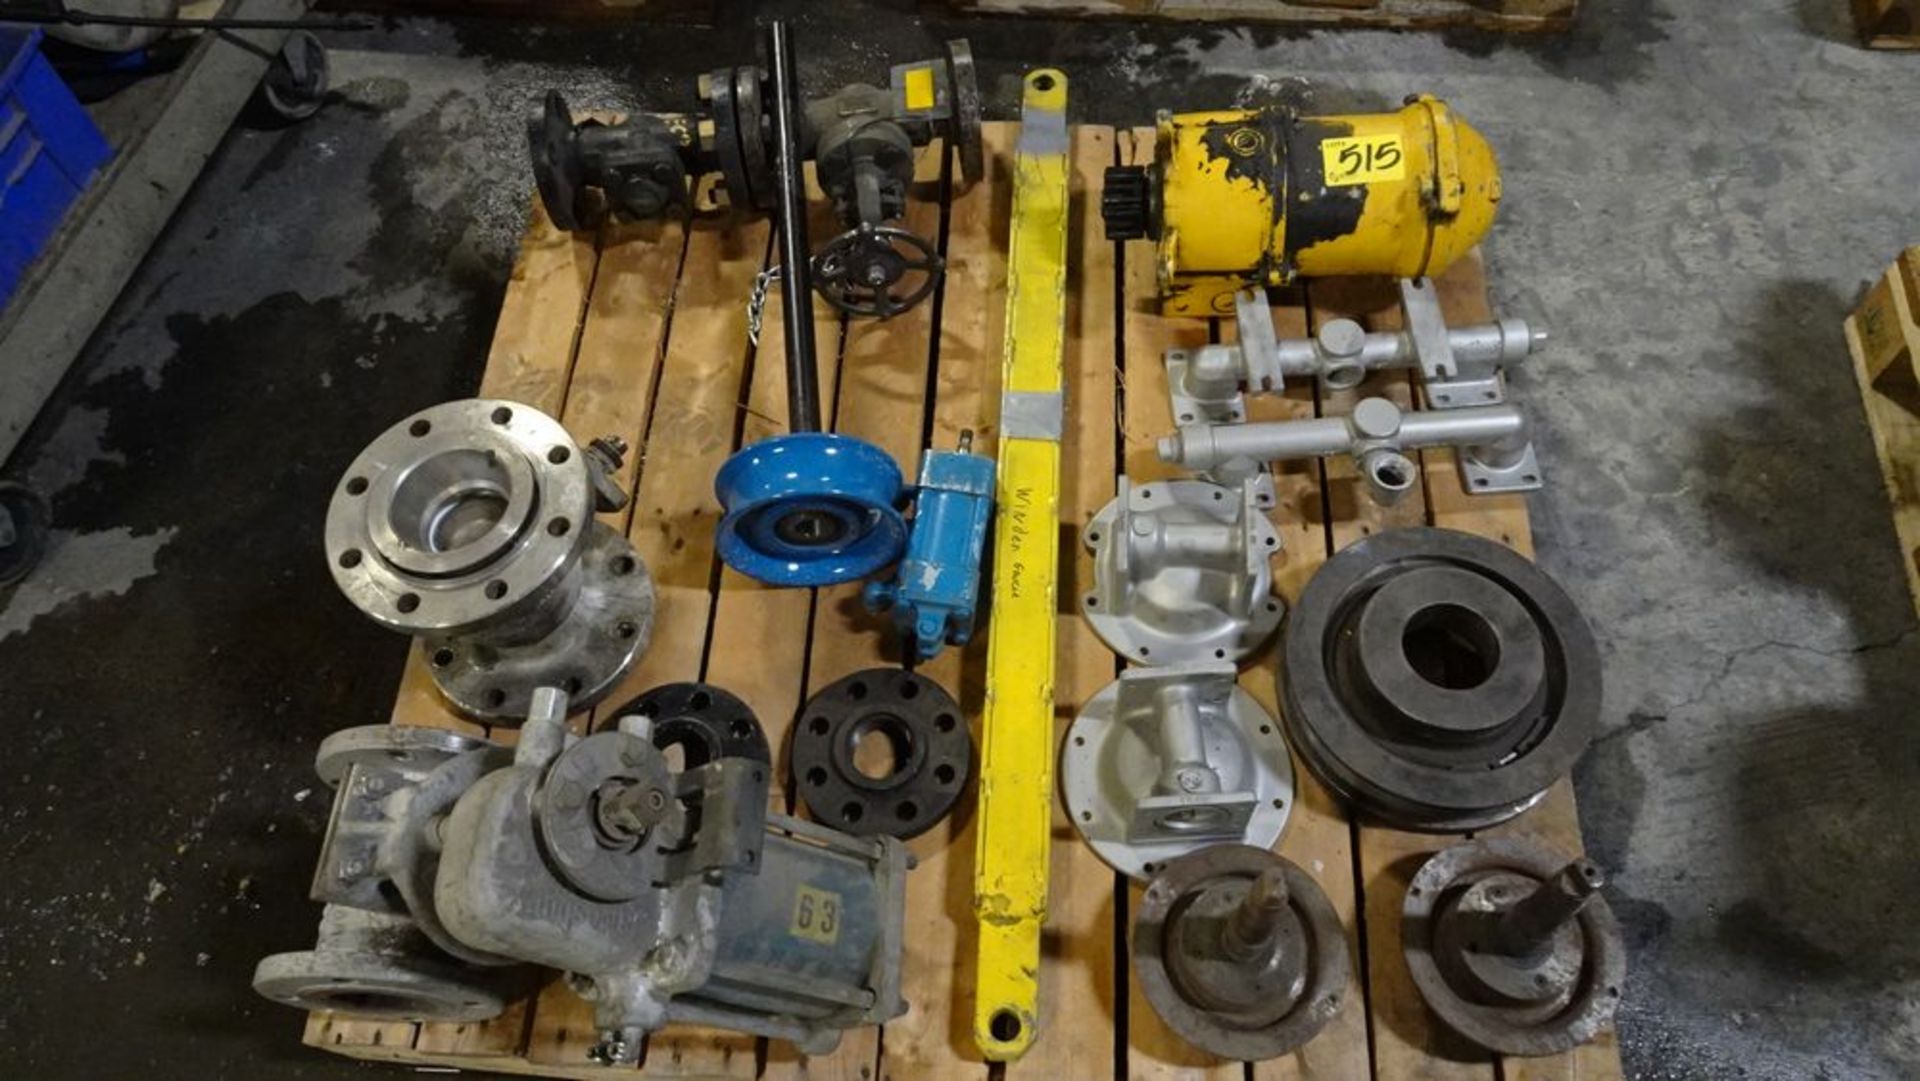 ASSORTED VALVES AND PARTS (RIGGING FEE $25)